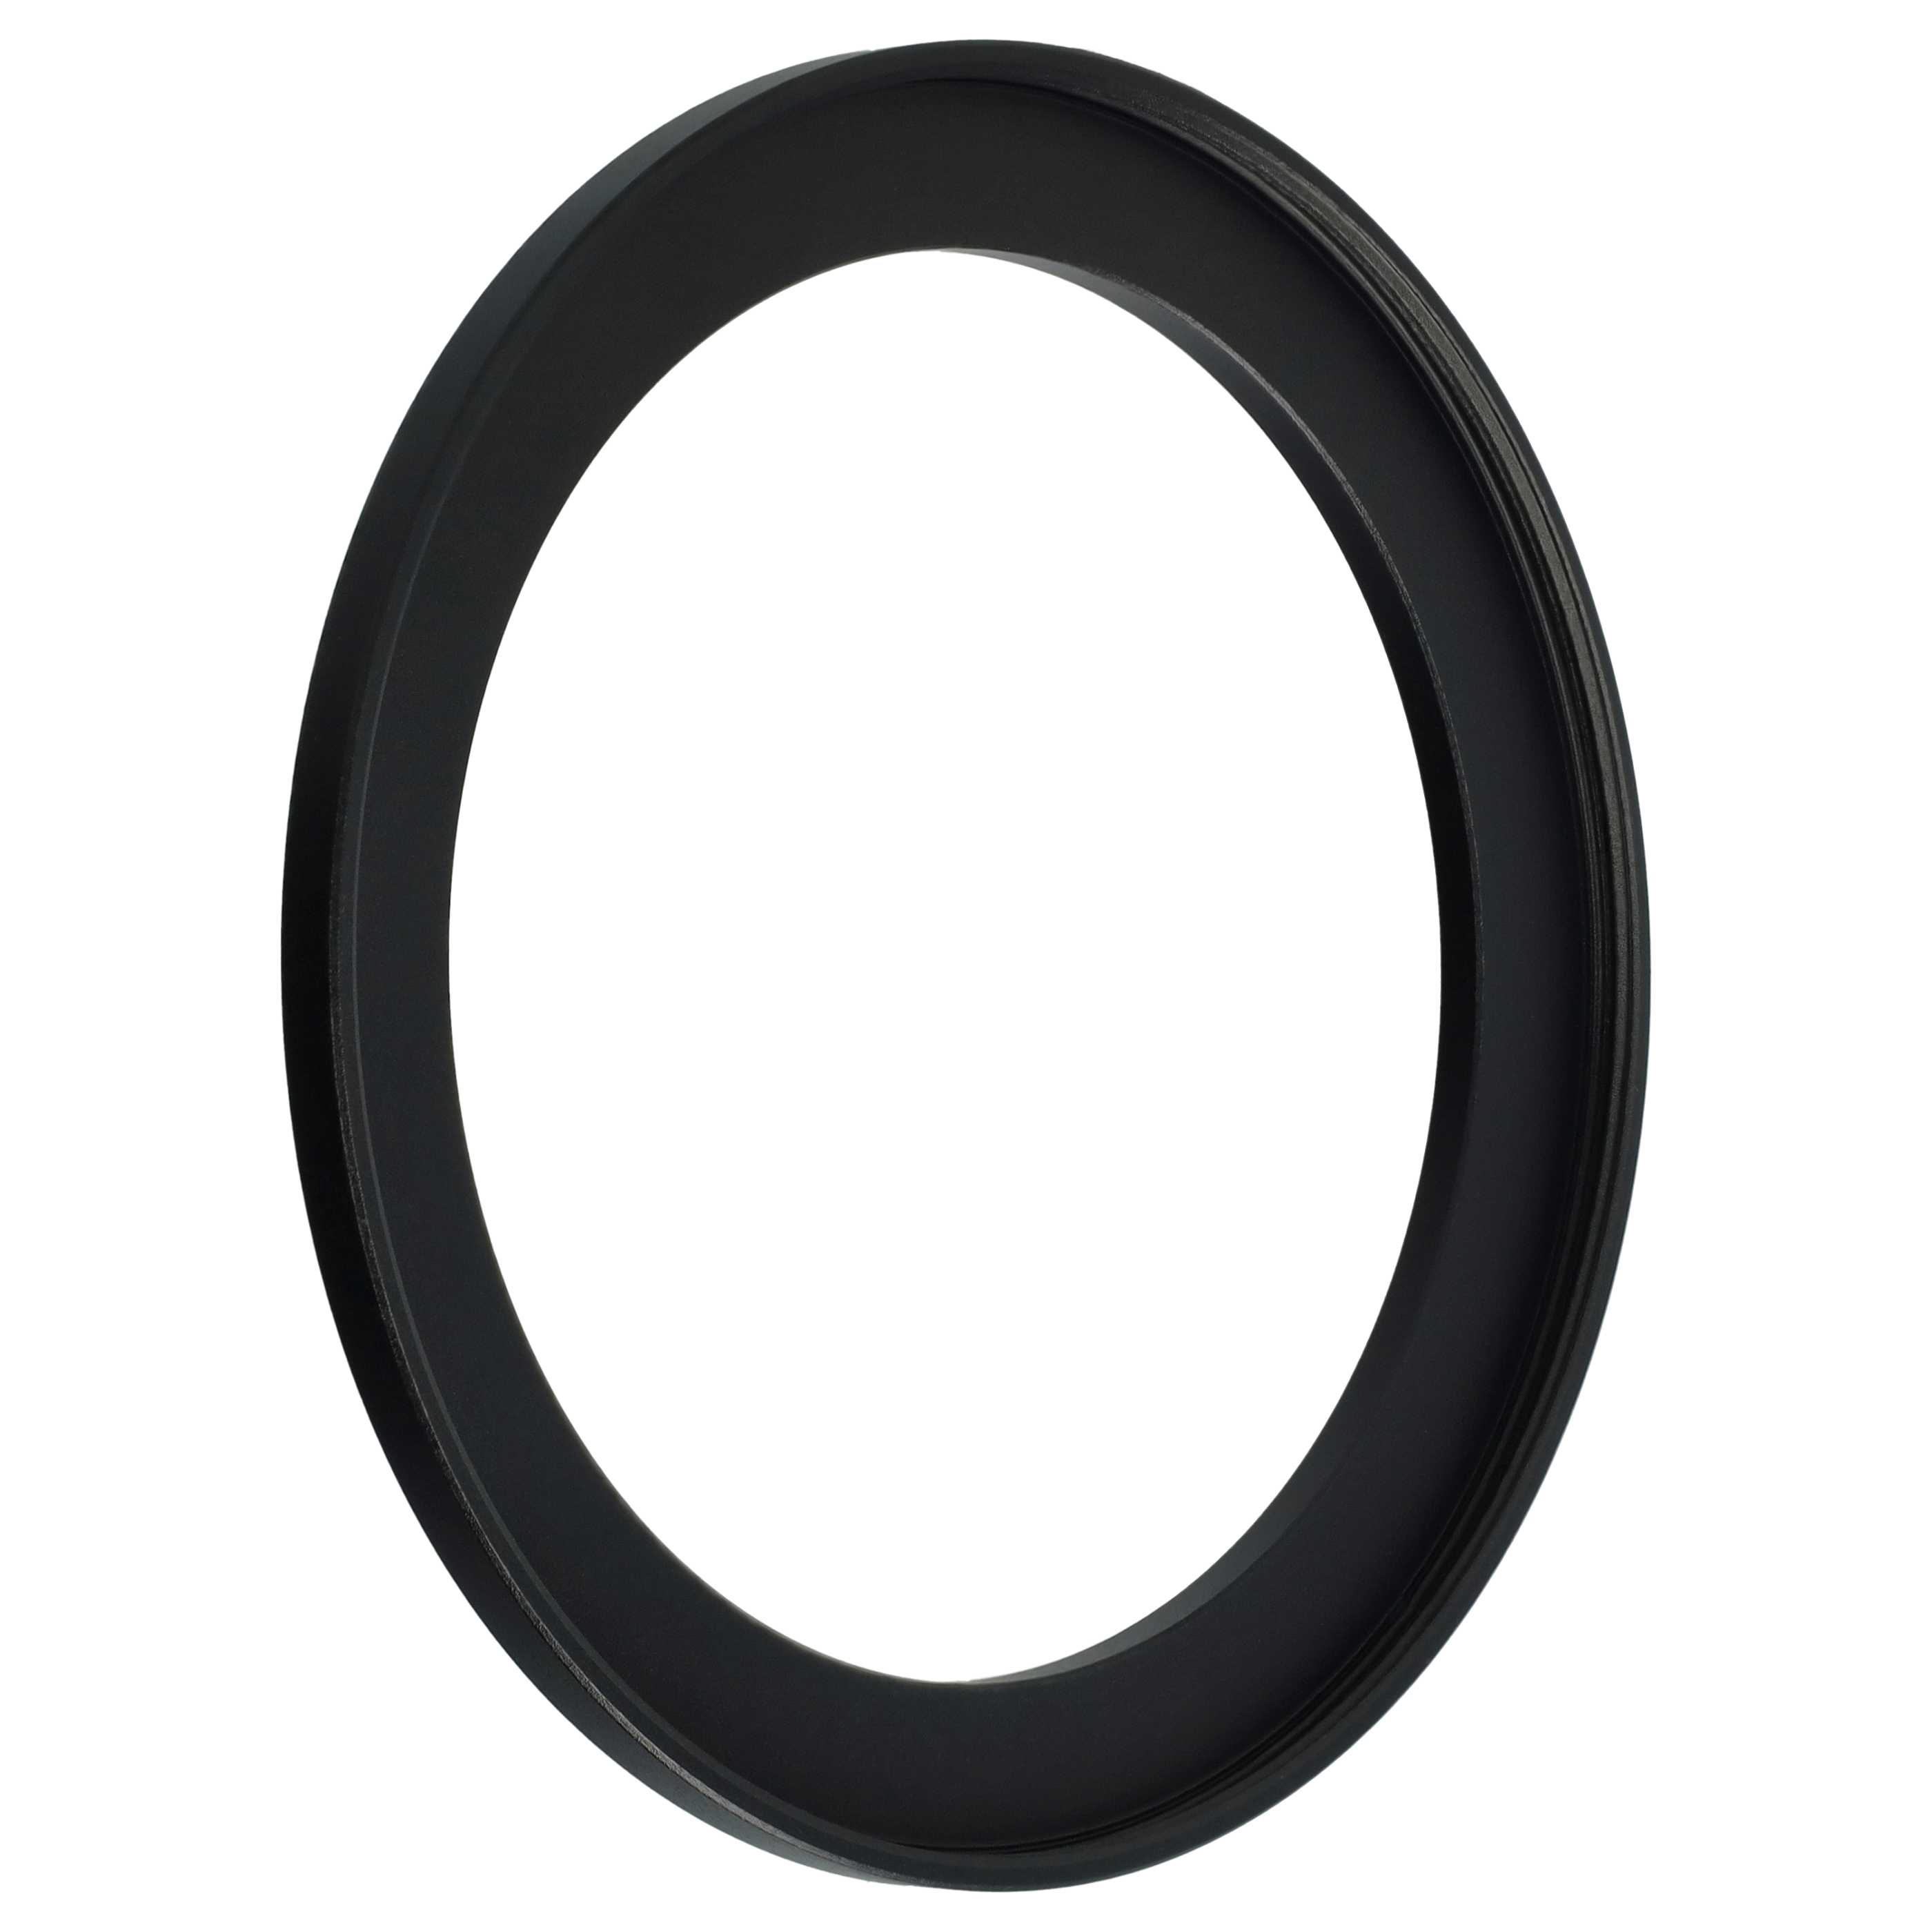 Step-Up Ring Adapter of 72 mm to 86 mmfor various Camera Lens - Filter Adapter